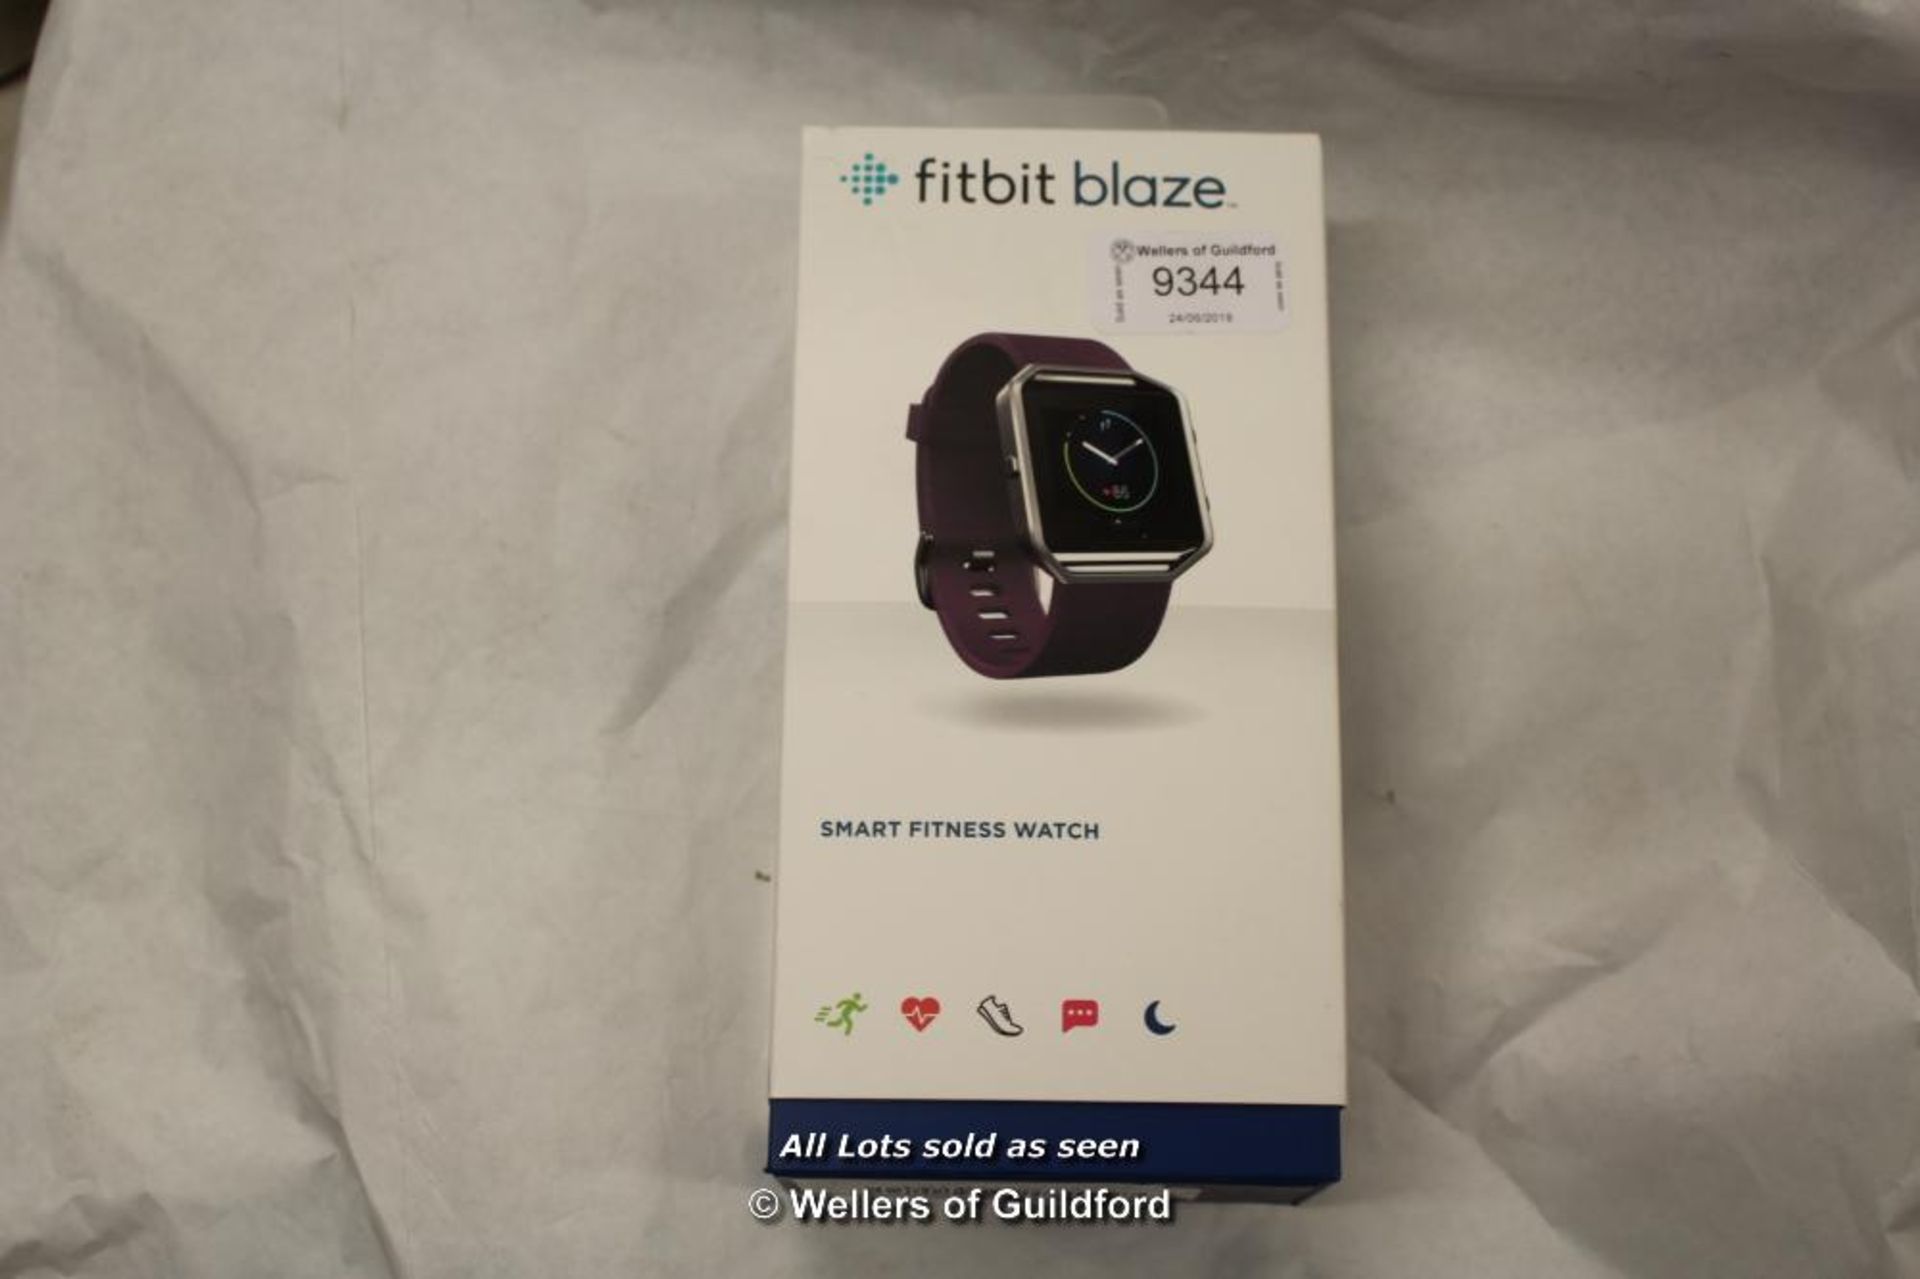 *FITBIT BLAZE SMART ACTIVITY TRACKER AND FITNESS WATCH WITH WRIST BASED HEART RATE MONITOR - PLUM/